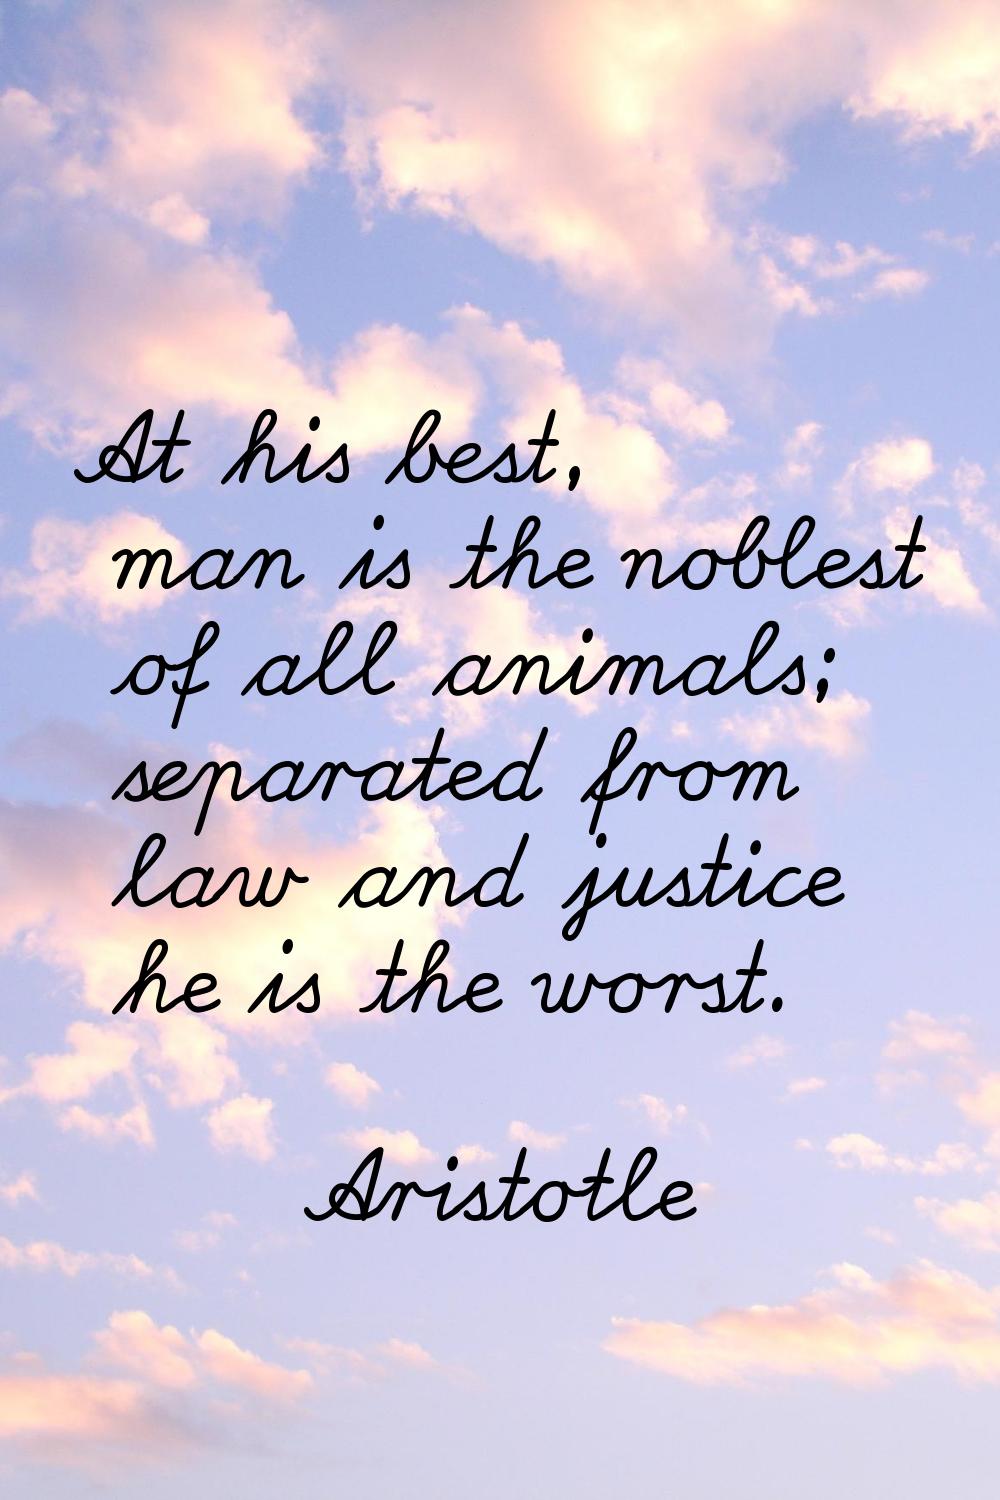 At his best, man is the noblest of all animals; separated from law and justice he is the worst.